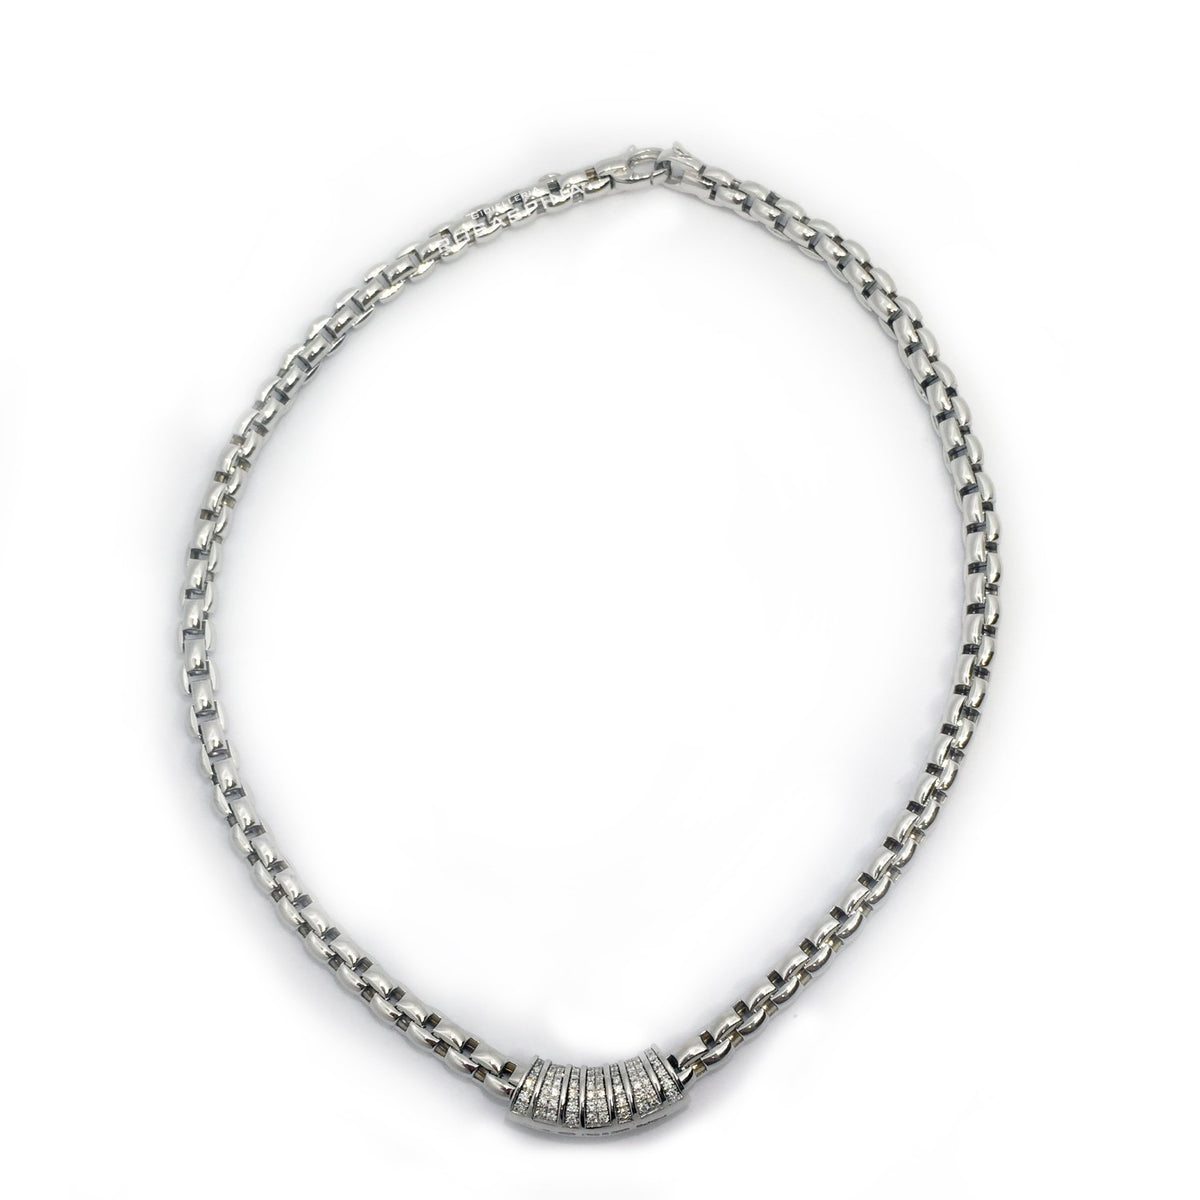 Flex'it necklace in Fope 708C PAVE WHITE gold